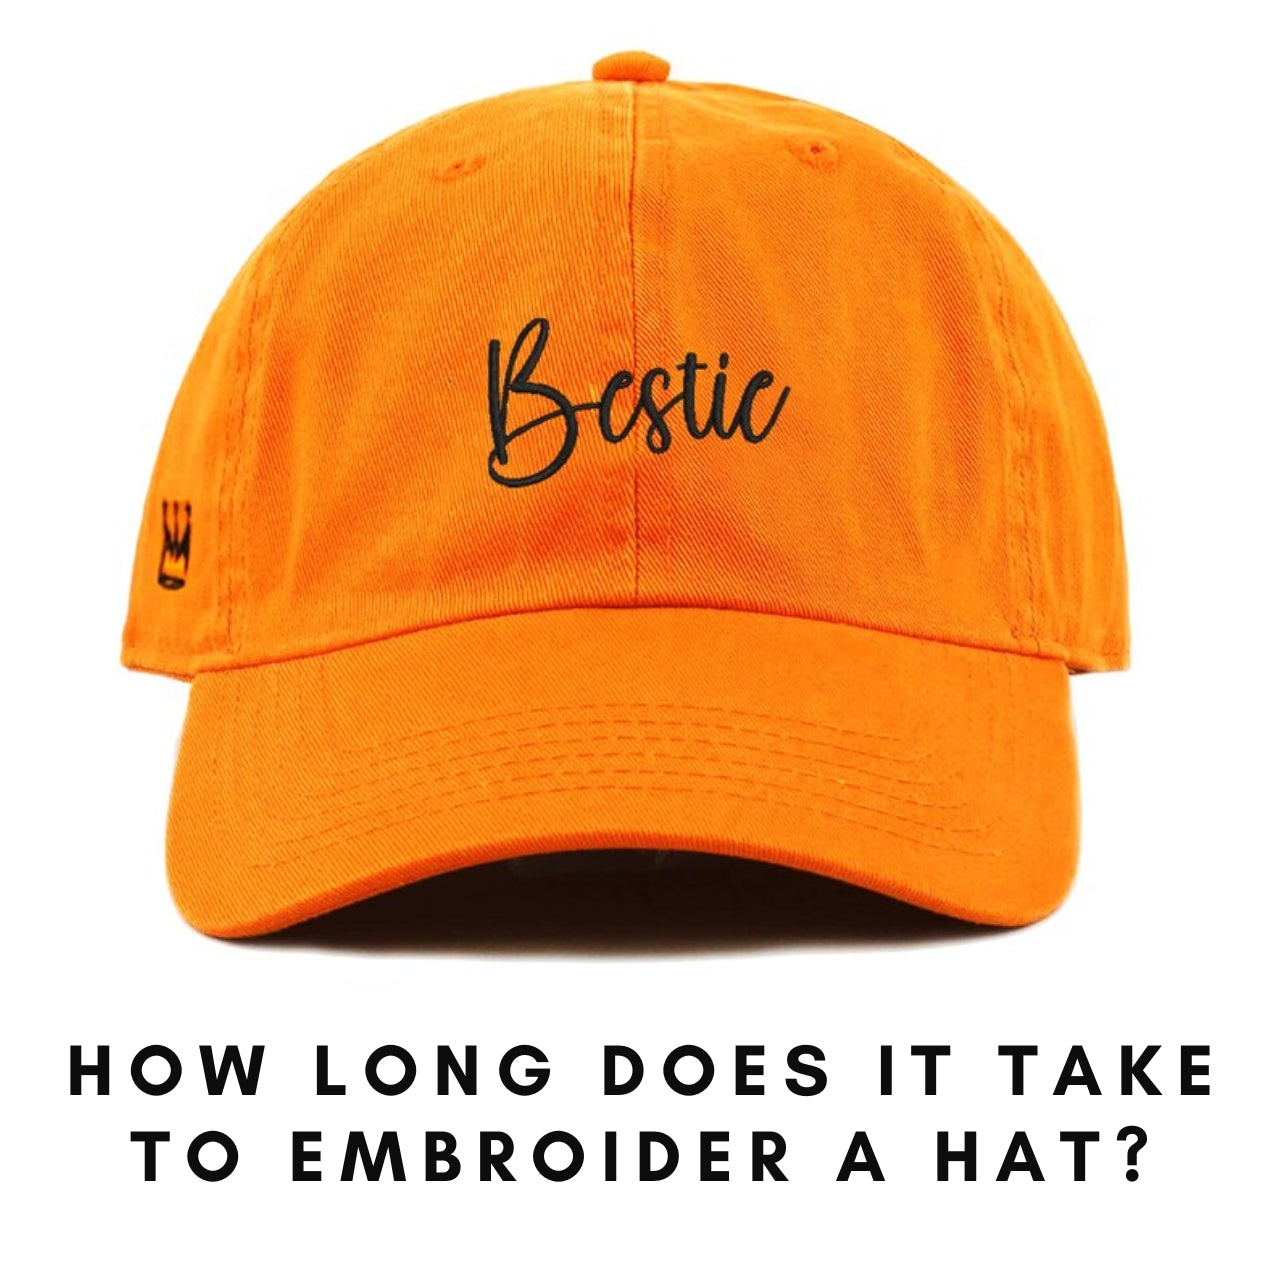 How long does it take to embroider a hat